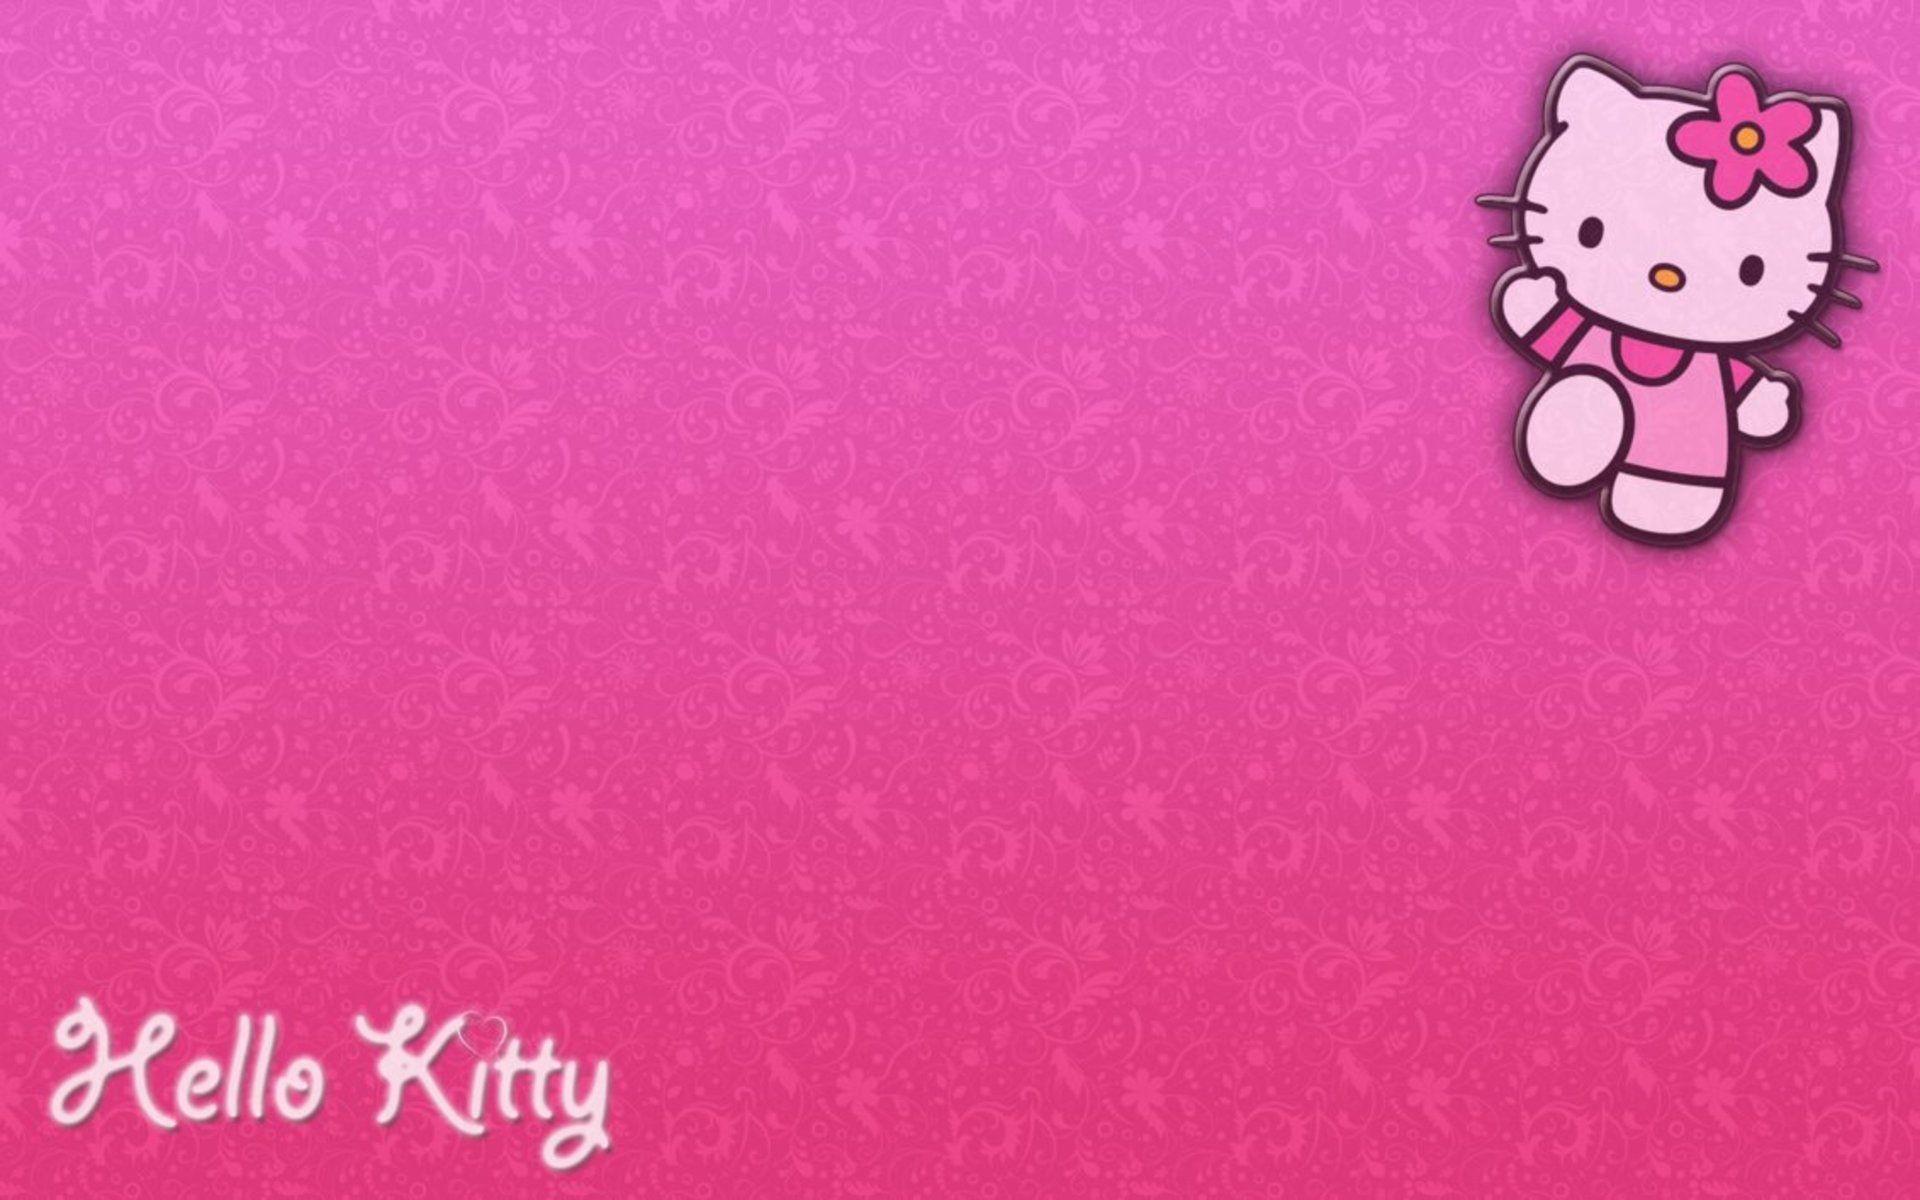 Pink Wallpaper Background Desktop Hello Kitty Biajingan Wall Touched up, cropped and adopted for wallpaper use by minh tan, digitalcitizen.ca. pink wallpaper background desktop hello